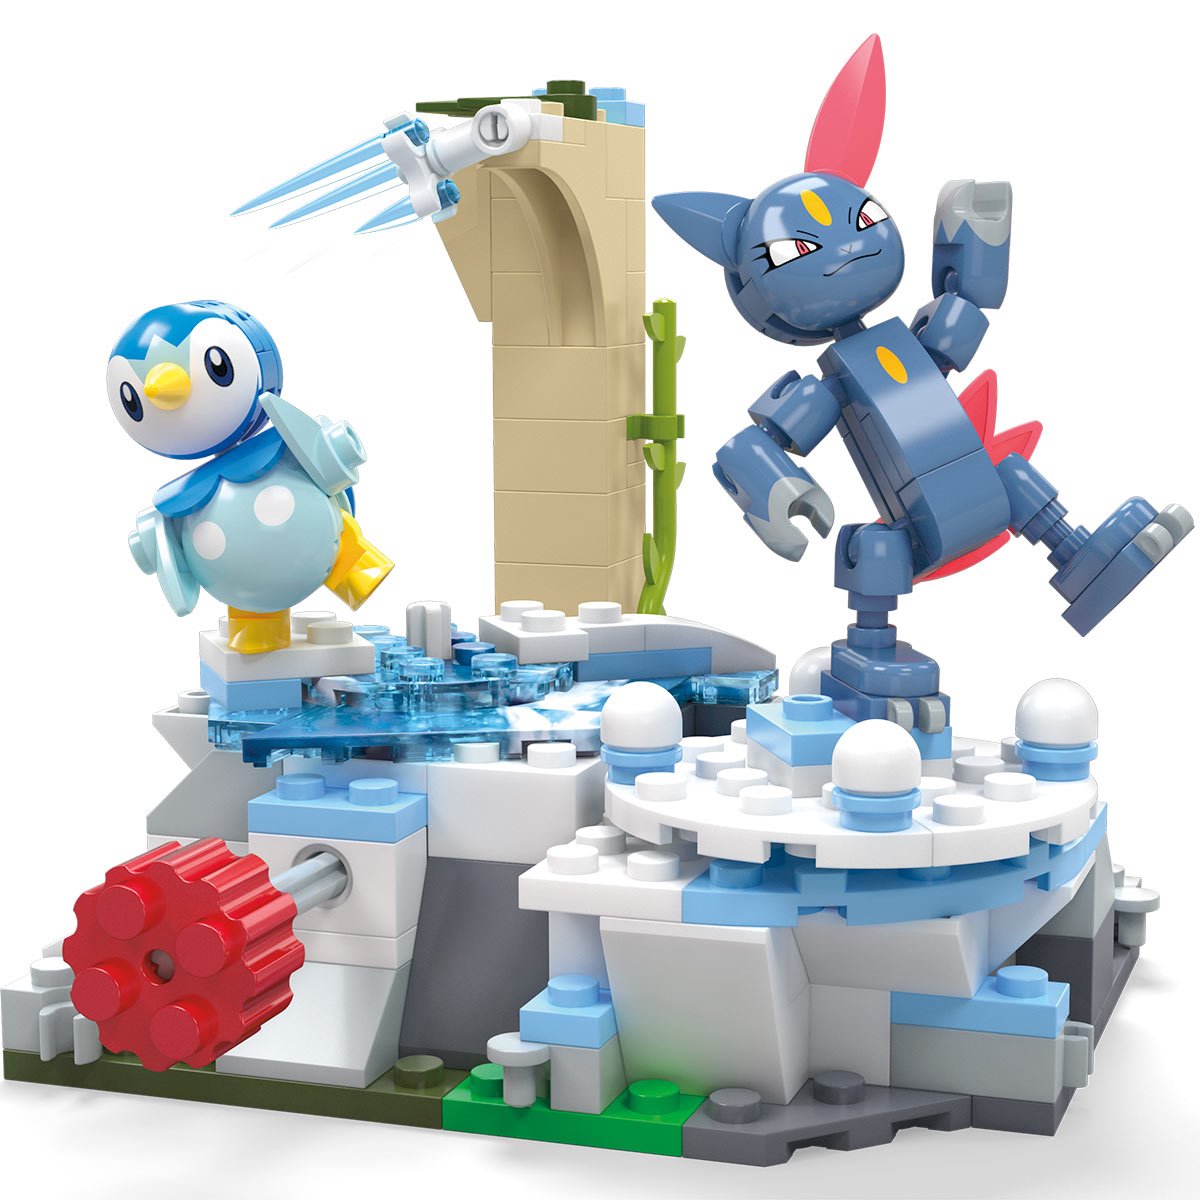 MEGA Pokémon Action Figure Building Toys, Piplup and Sneasel's Snow Day  With 171 Pieces and Motion, 2 Poseable Characters, For Kids